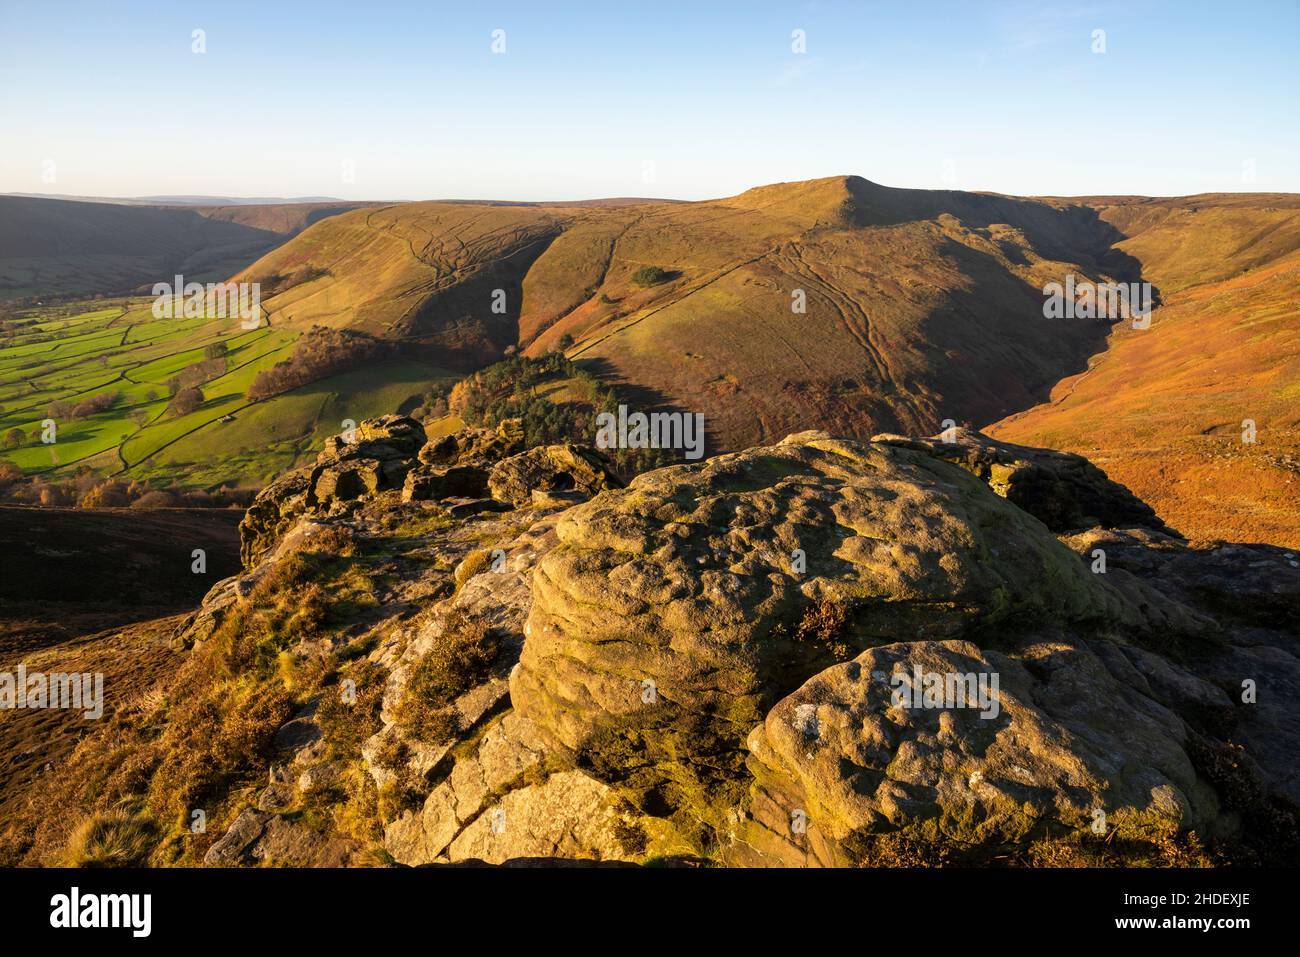 Gritstone outcrops at Ringing Roger on the edge of Kinder Scout, Edale, Derbyshire, Peak District, England. Grinsbrook Clough in the background. Stock Photo